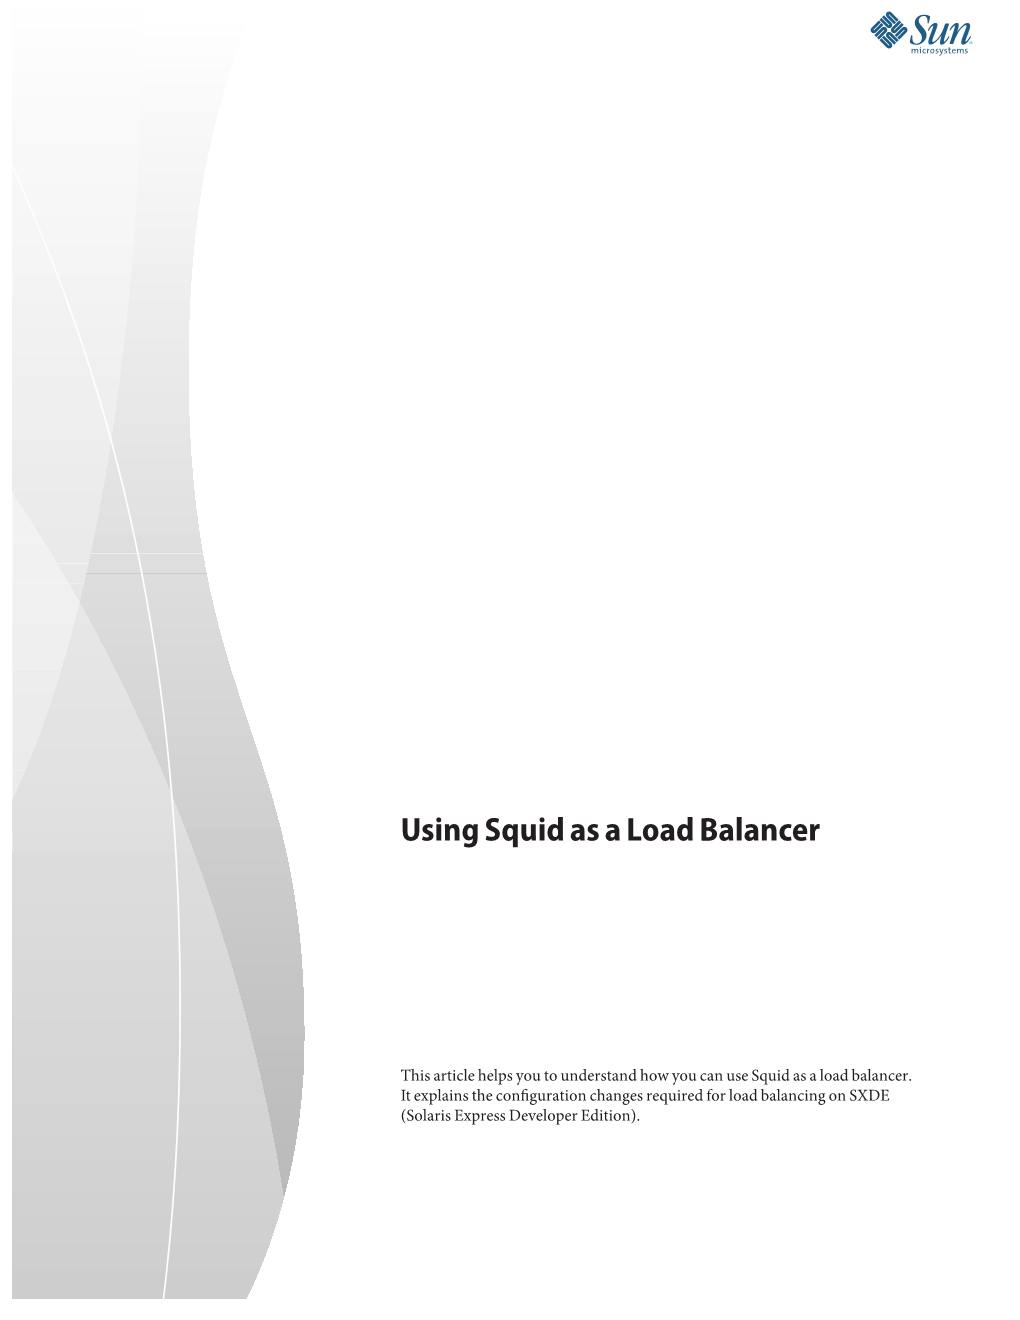 Using Squid As a Load Balancer